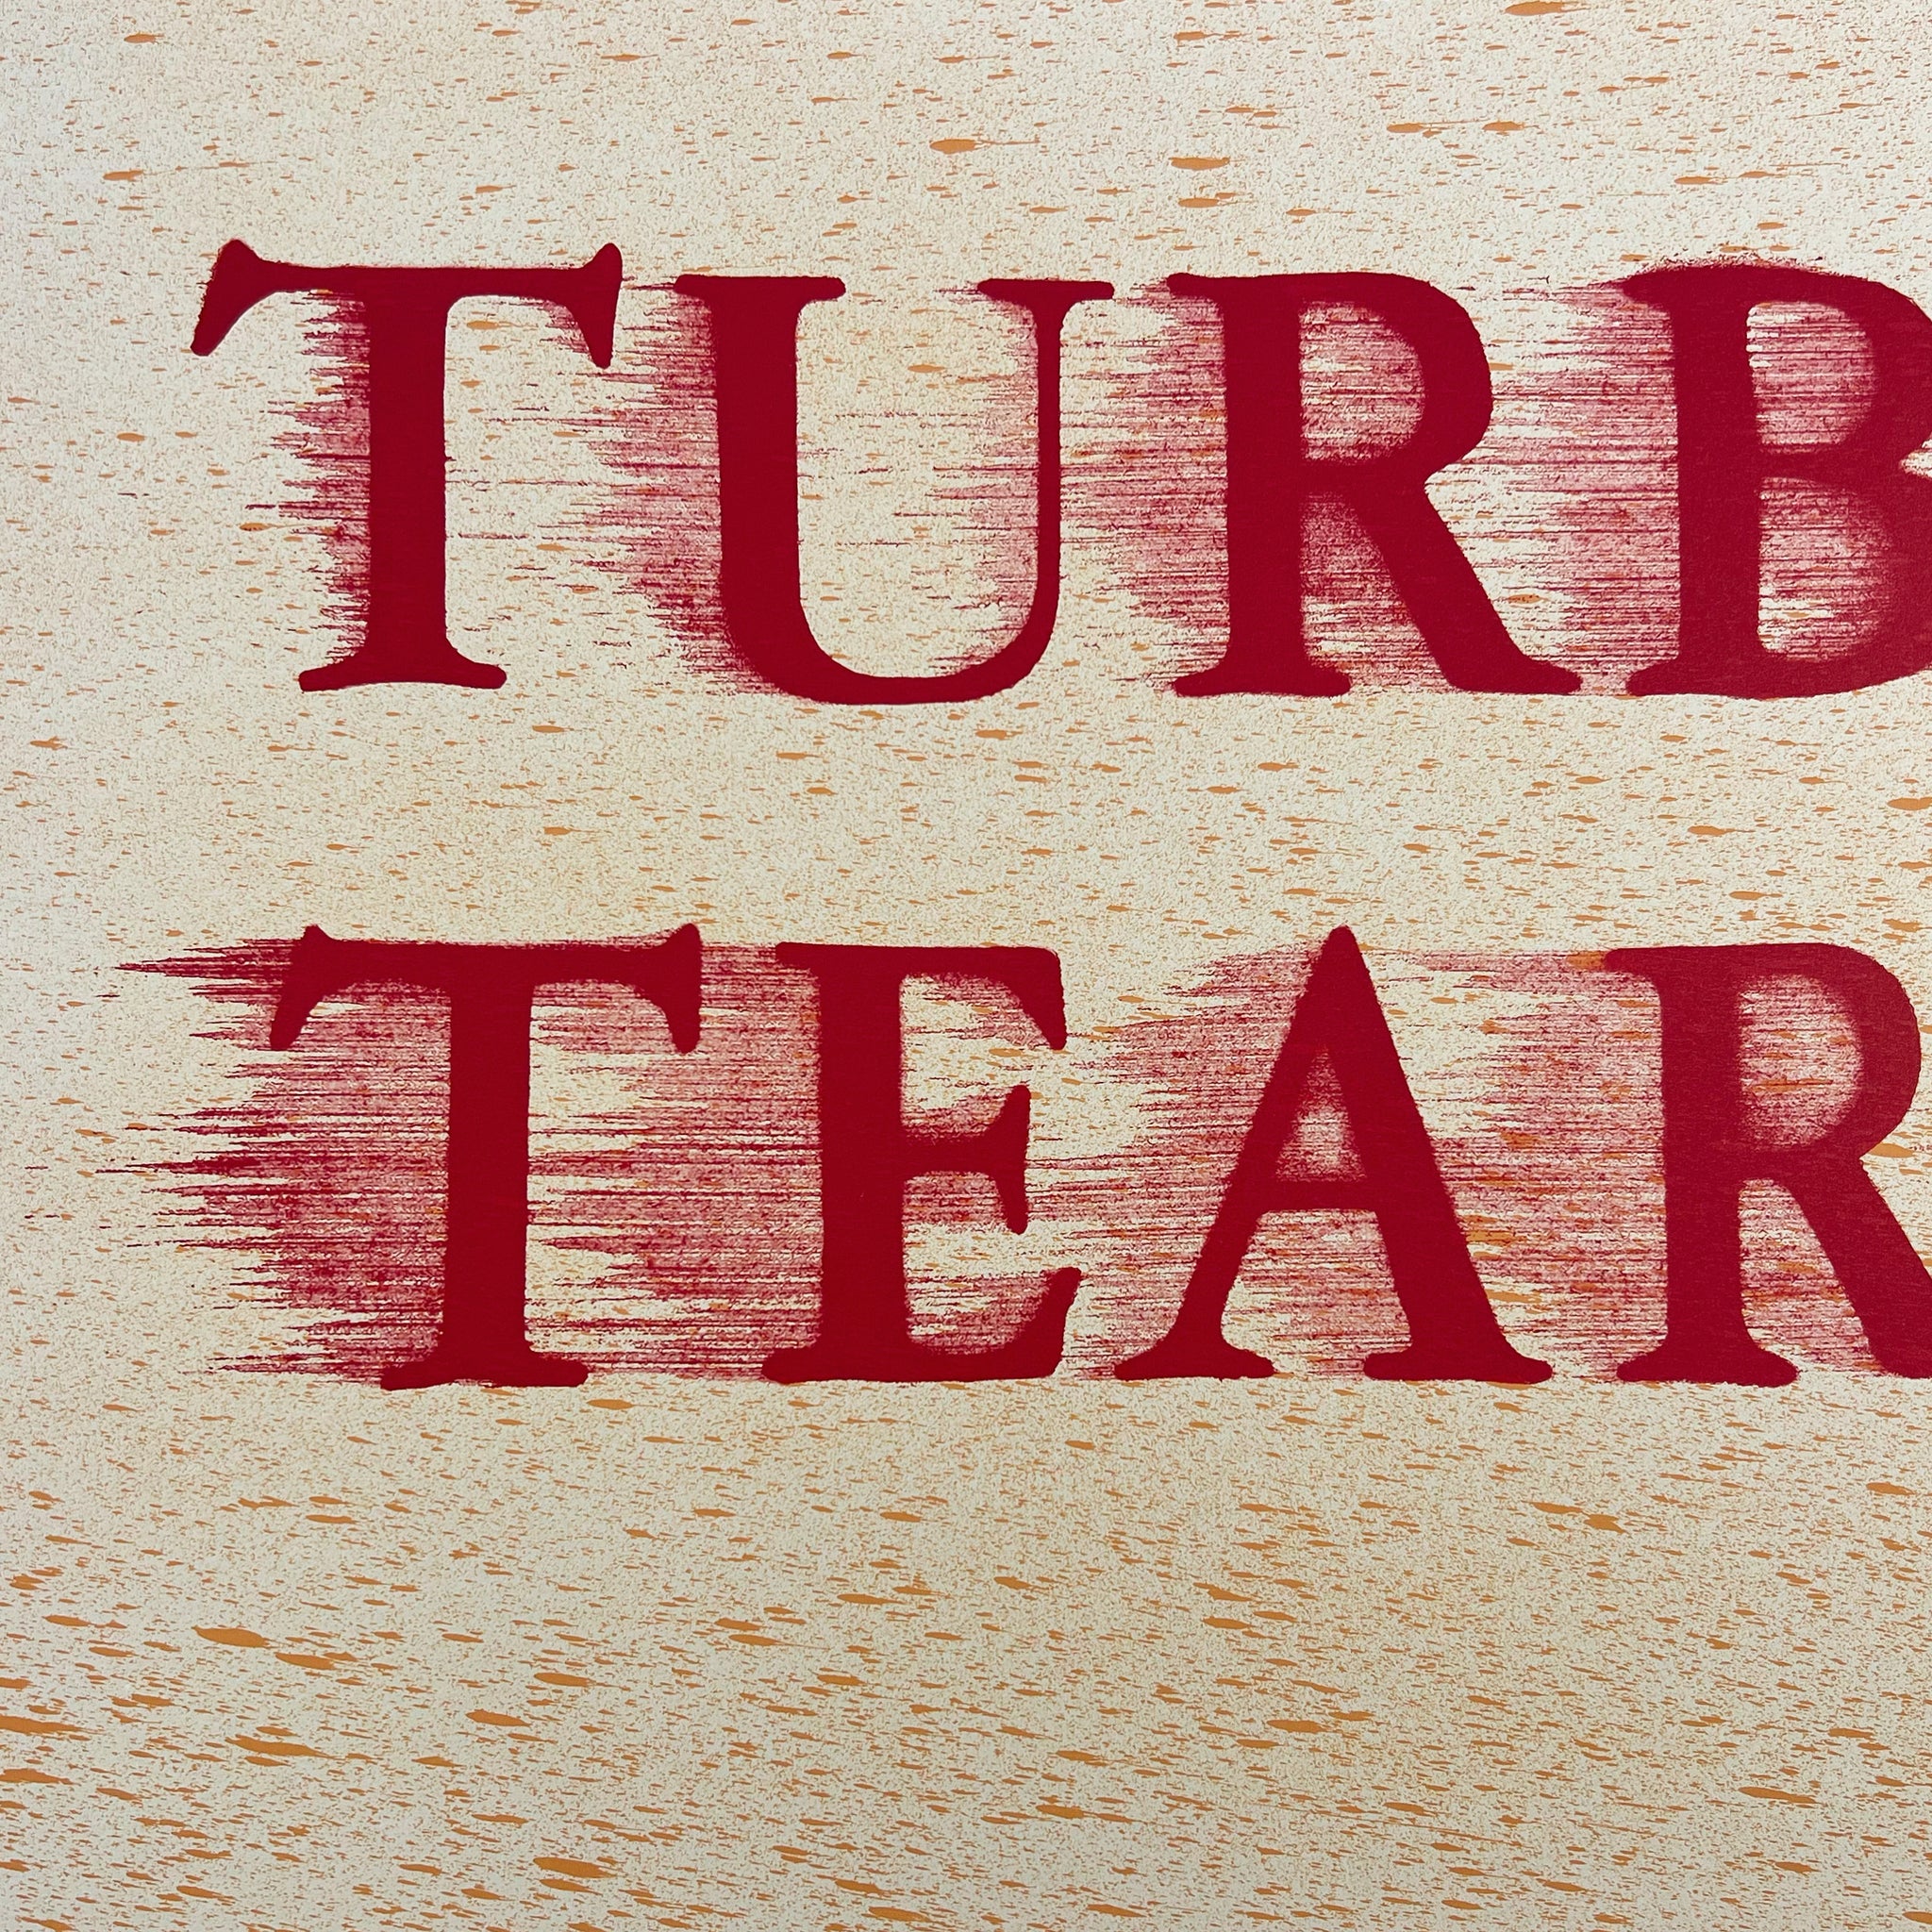 Turbo Tears, Lithograph on Paper, Framed